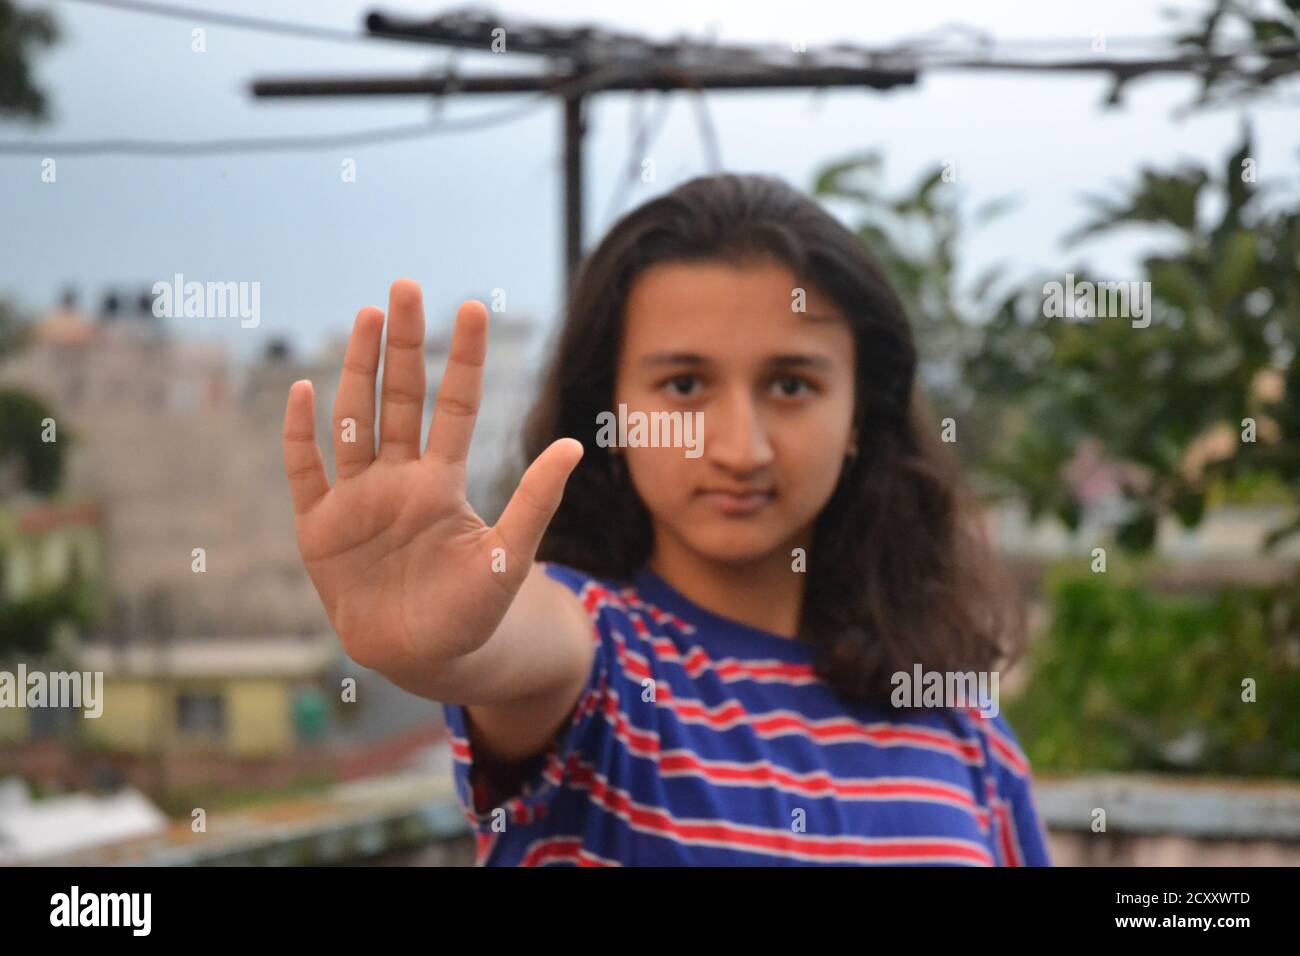 A South Asian girl shows some gestures. Stock Photo